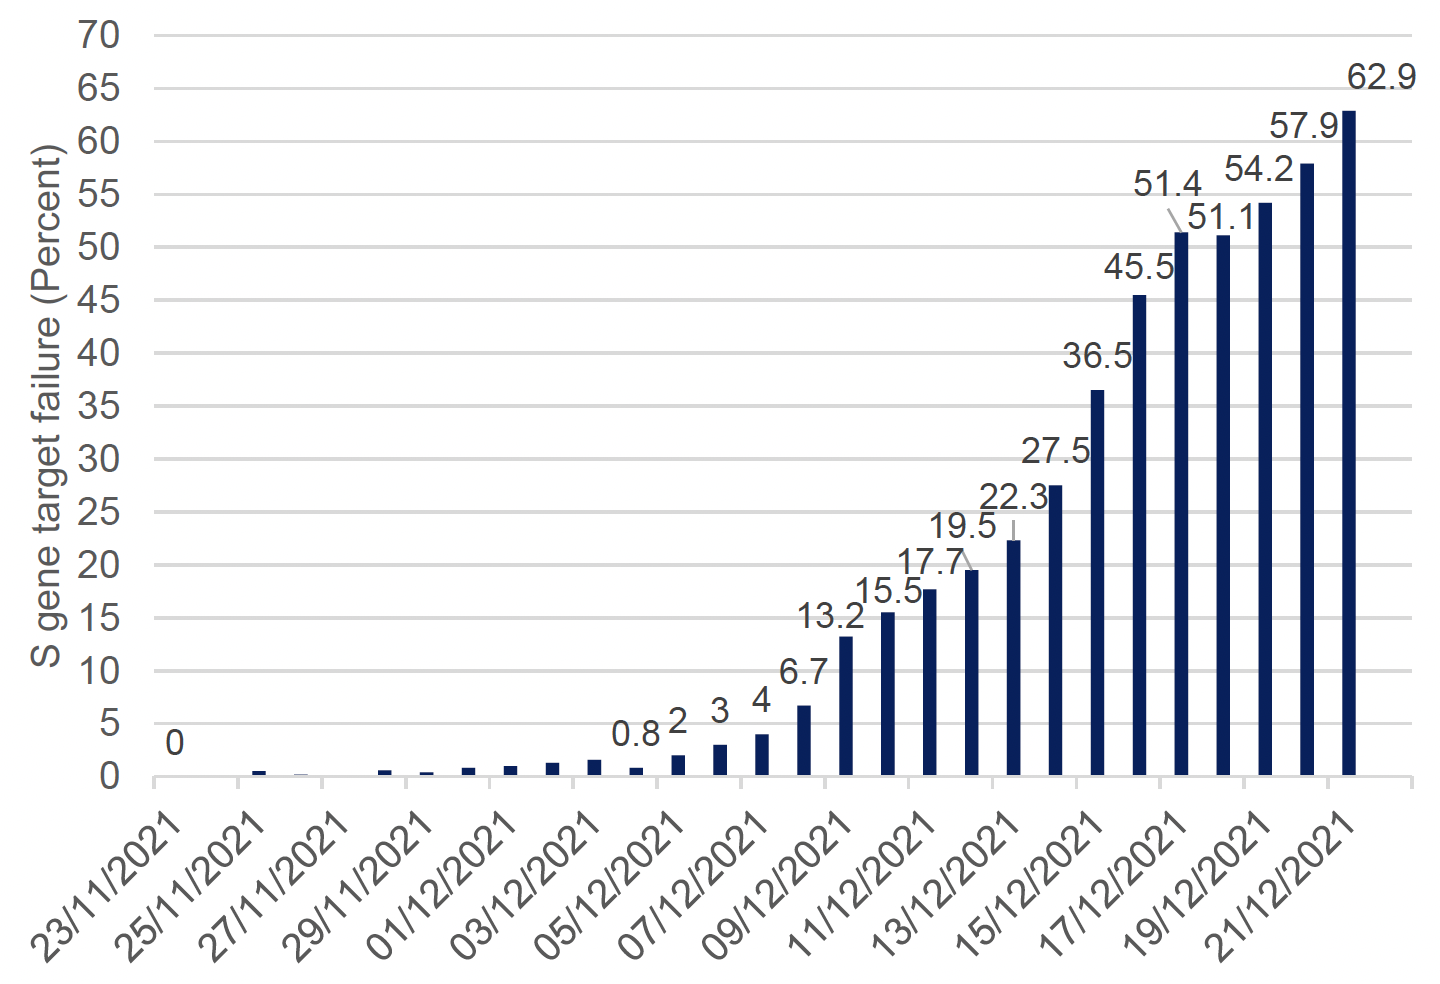 This column chart shows the percentage of positive cases going through the Pillar 2 Lighthouse lab that have the S gene target failure (SGTF) used to identify the Omicron variant, for each day since 23 November 2021. The proportion of SGTF cases have increased exponentially over this time period, from 0% on 23 November to 62.9% on 21 December.